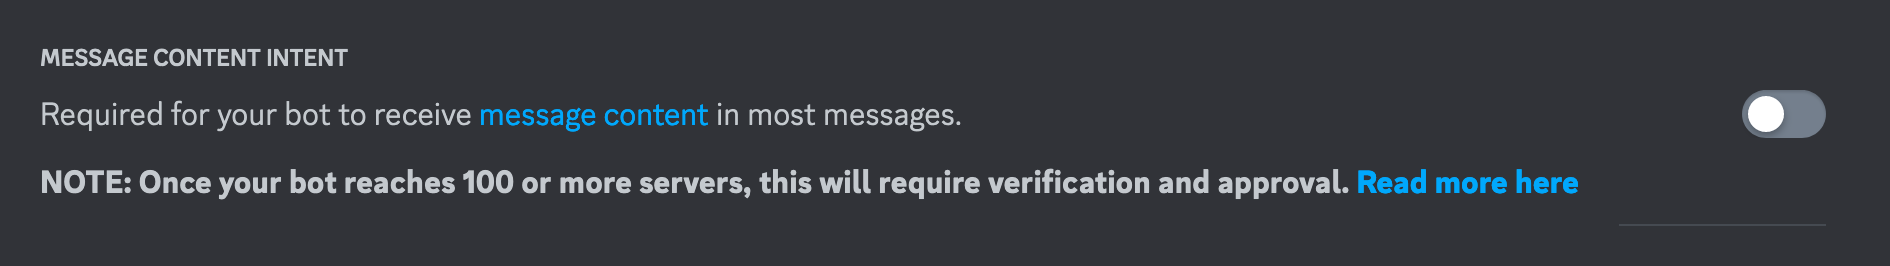 Capture d'écran du panneau de configuration d'un bot Discord. “MESSAGE CONTENT INTENT. Required for your bot to receive message content in most messages. NOTE: Once your bot reaches 100 or more servers, this will require verification and approval. Read more here.”